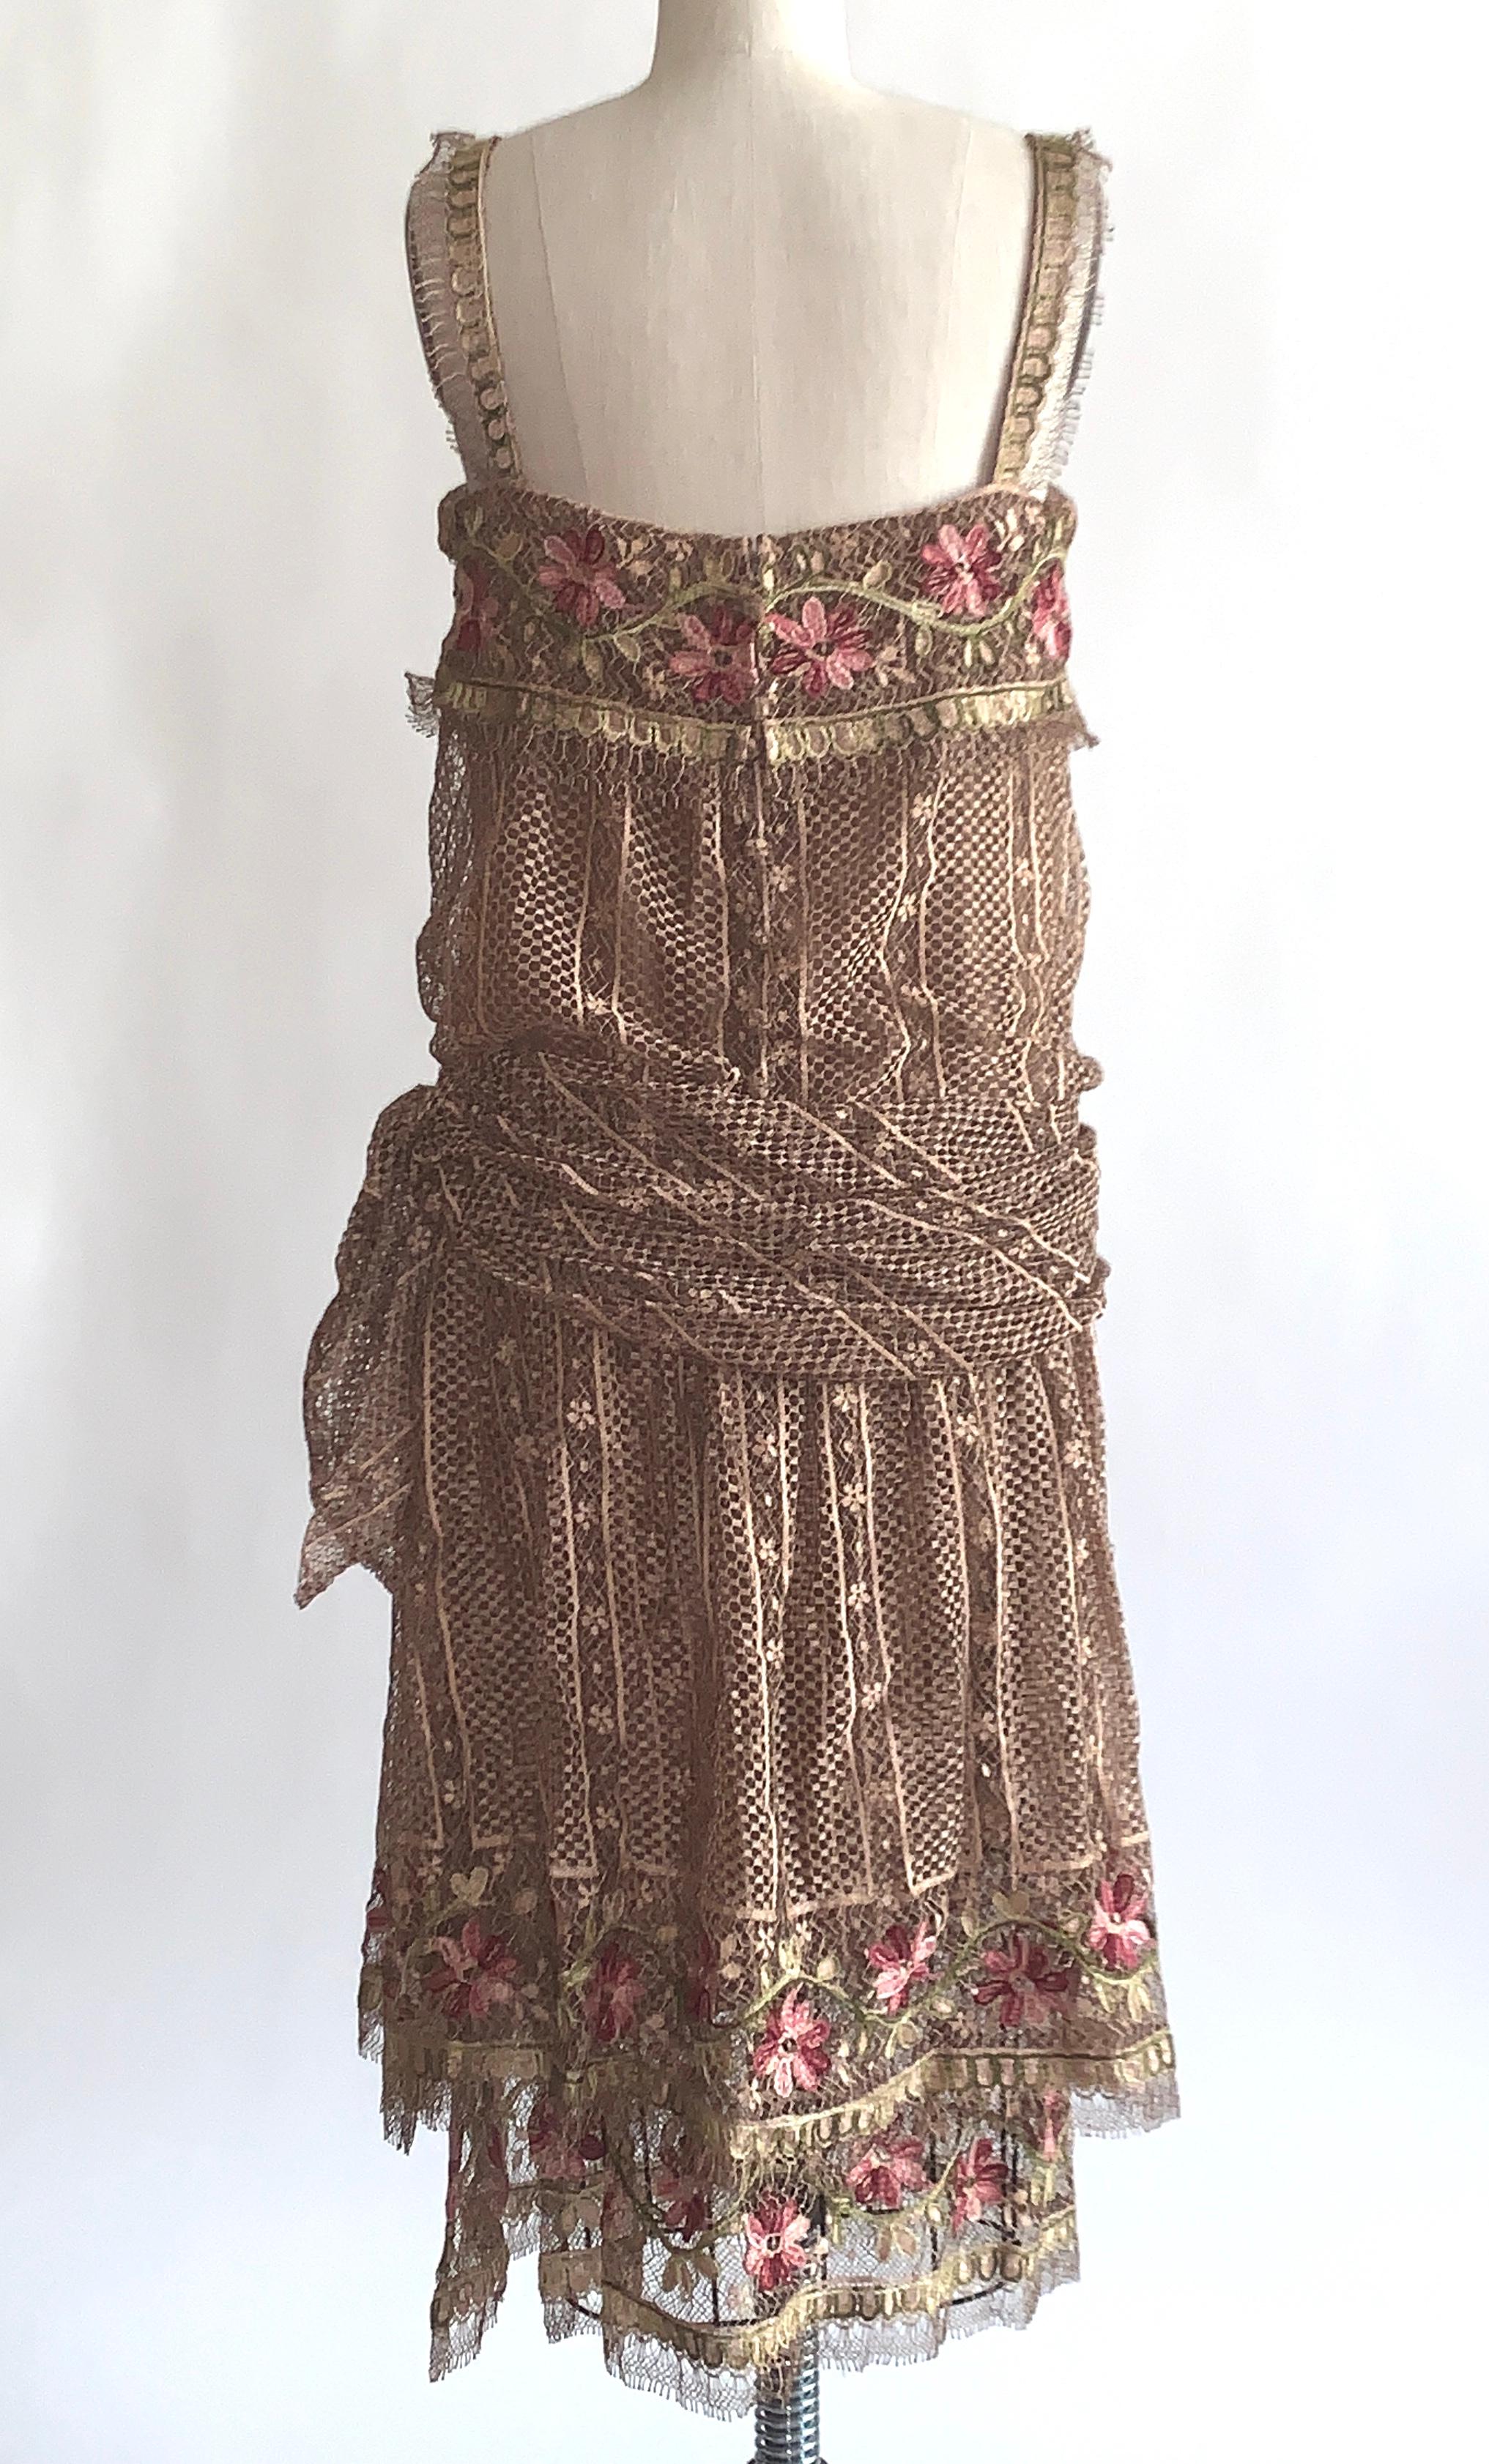 1970s Louis Feraud Couture Tan Lace Floral Embroidered Dress  In Excellent Condition For Sale In San Francisco, CA